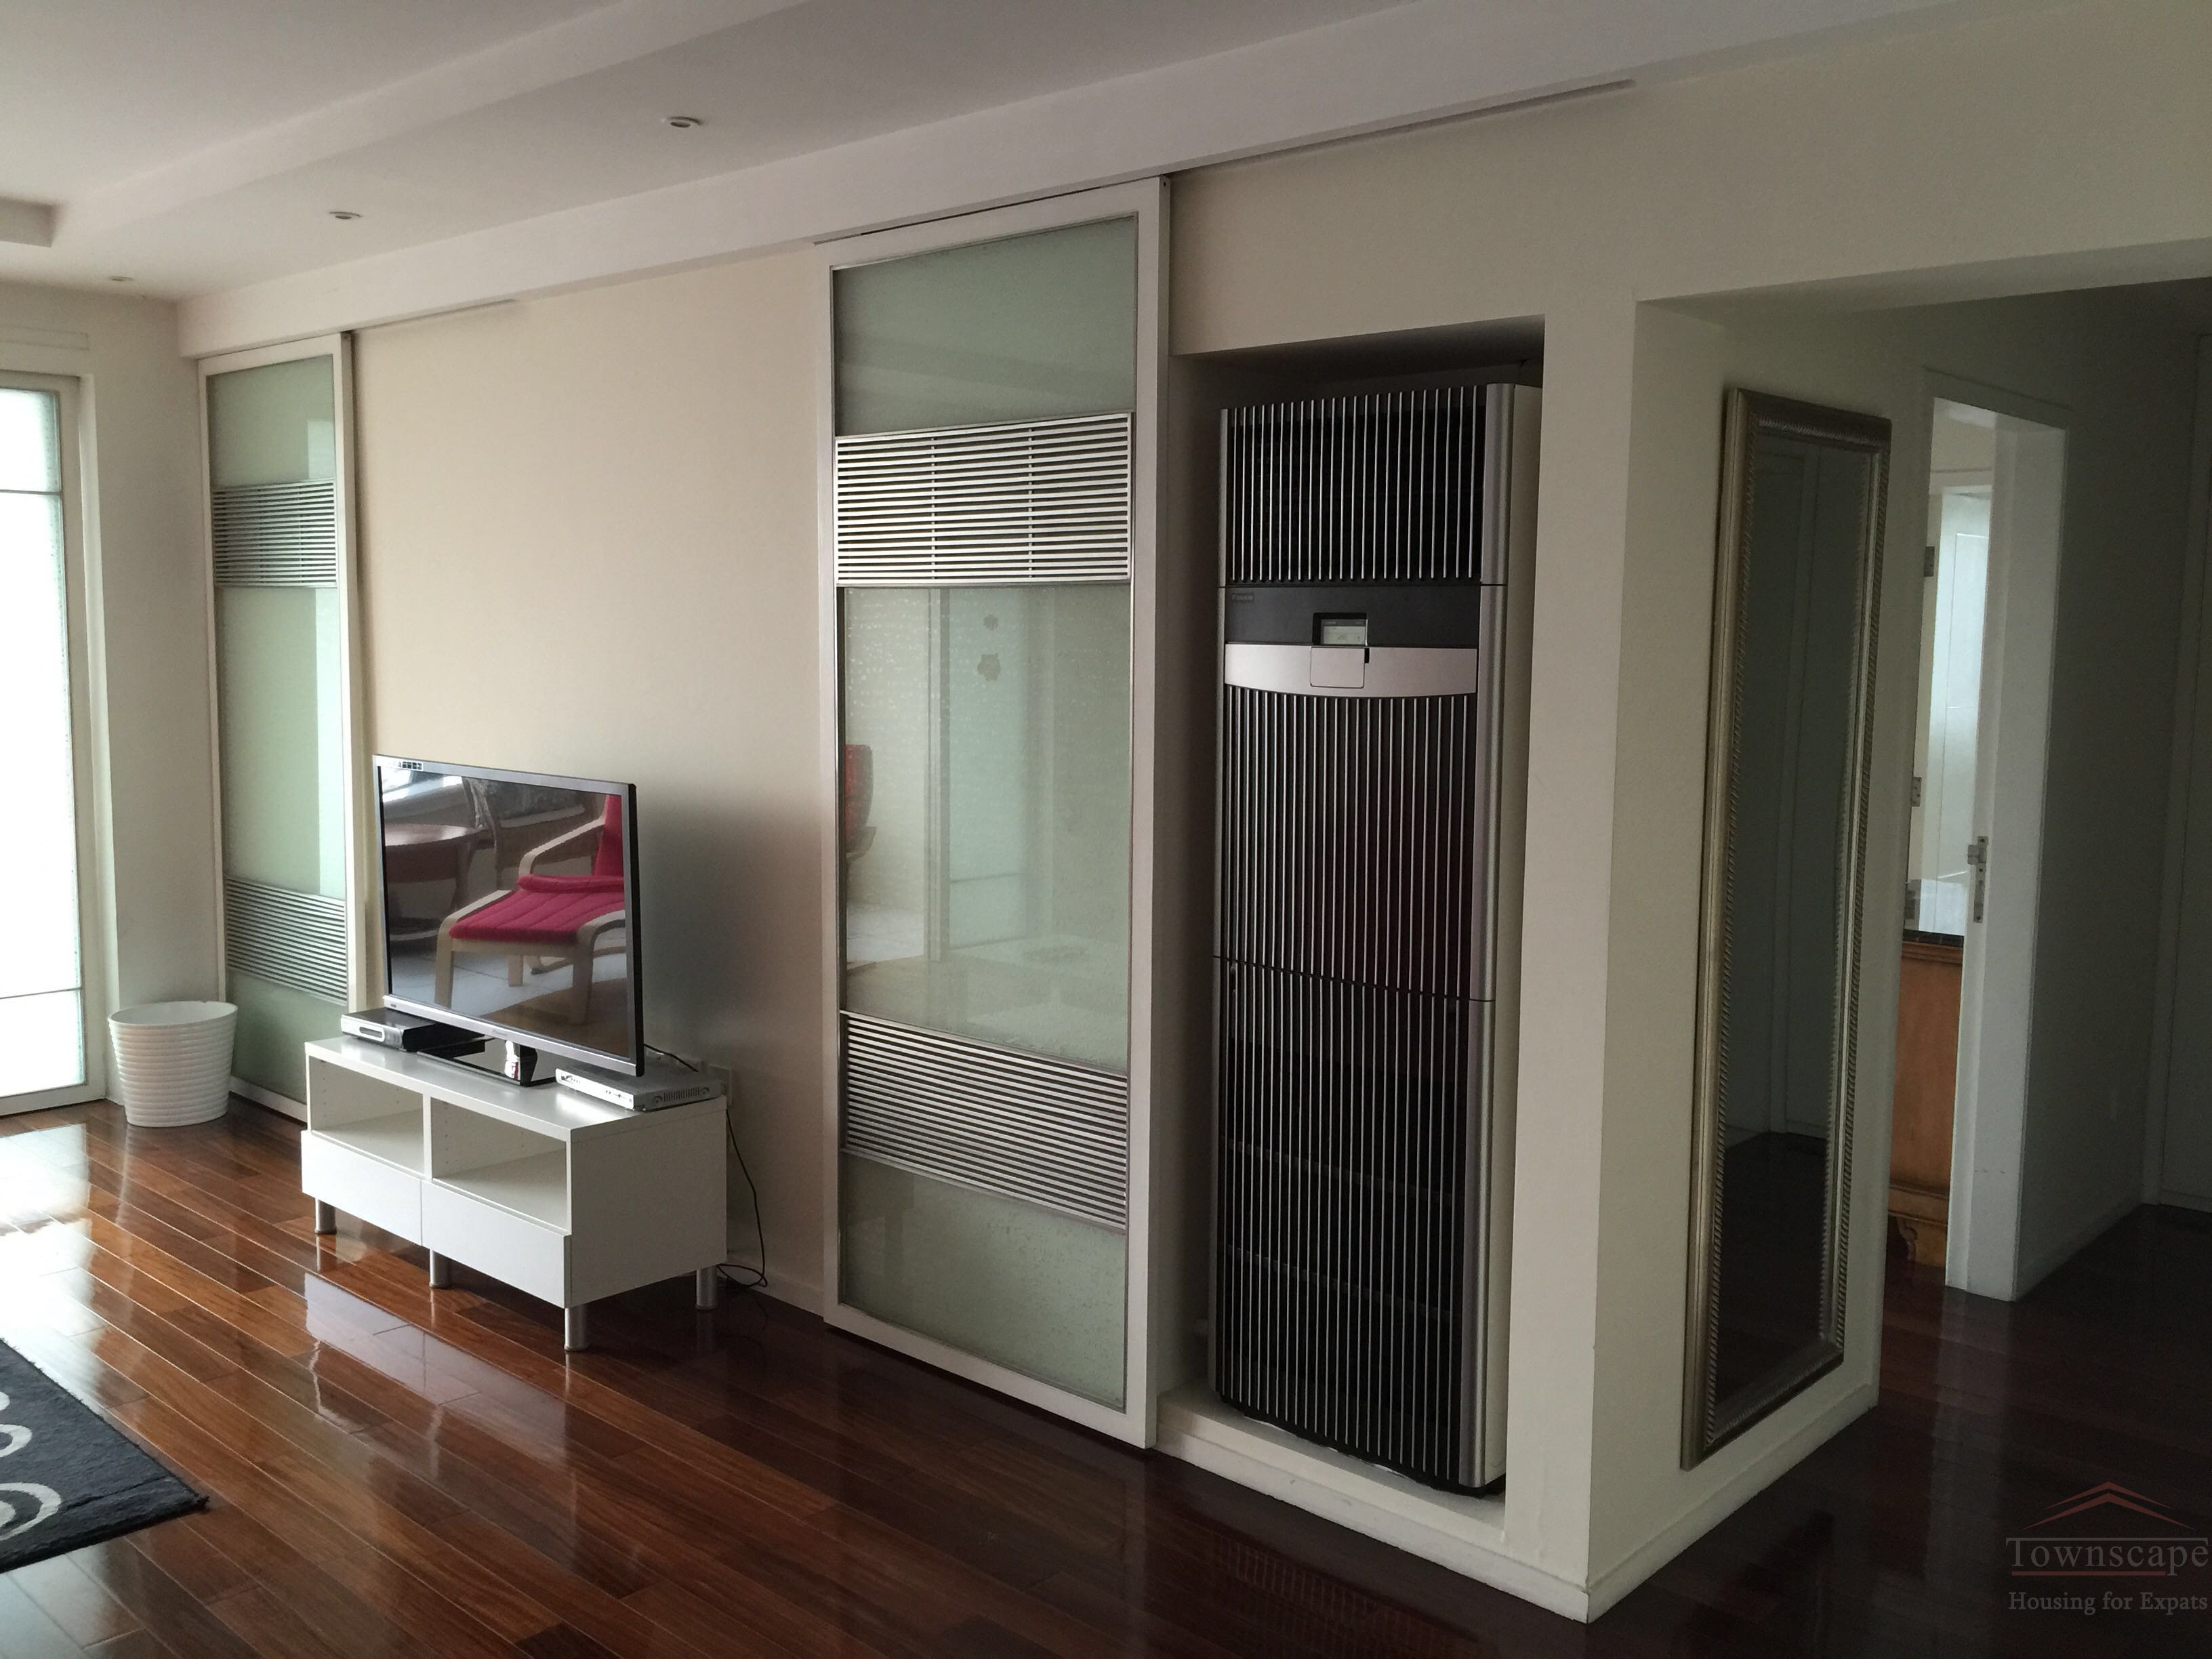 Shanghai apartment for rent Spacious, modern 2BR Apartment with balcony on Huashan Road